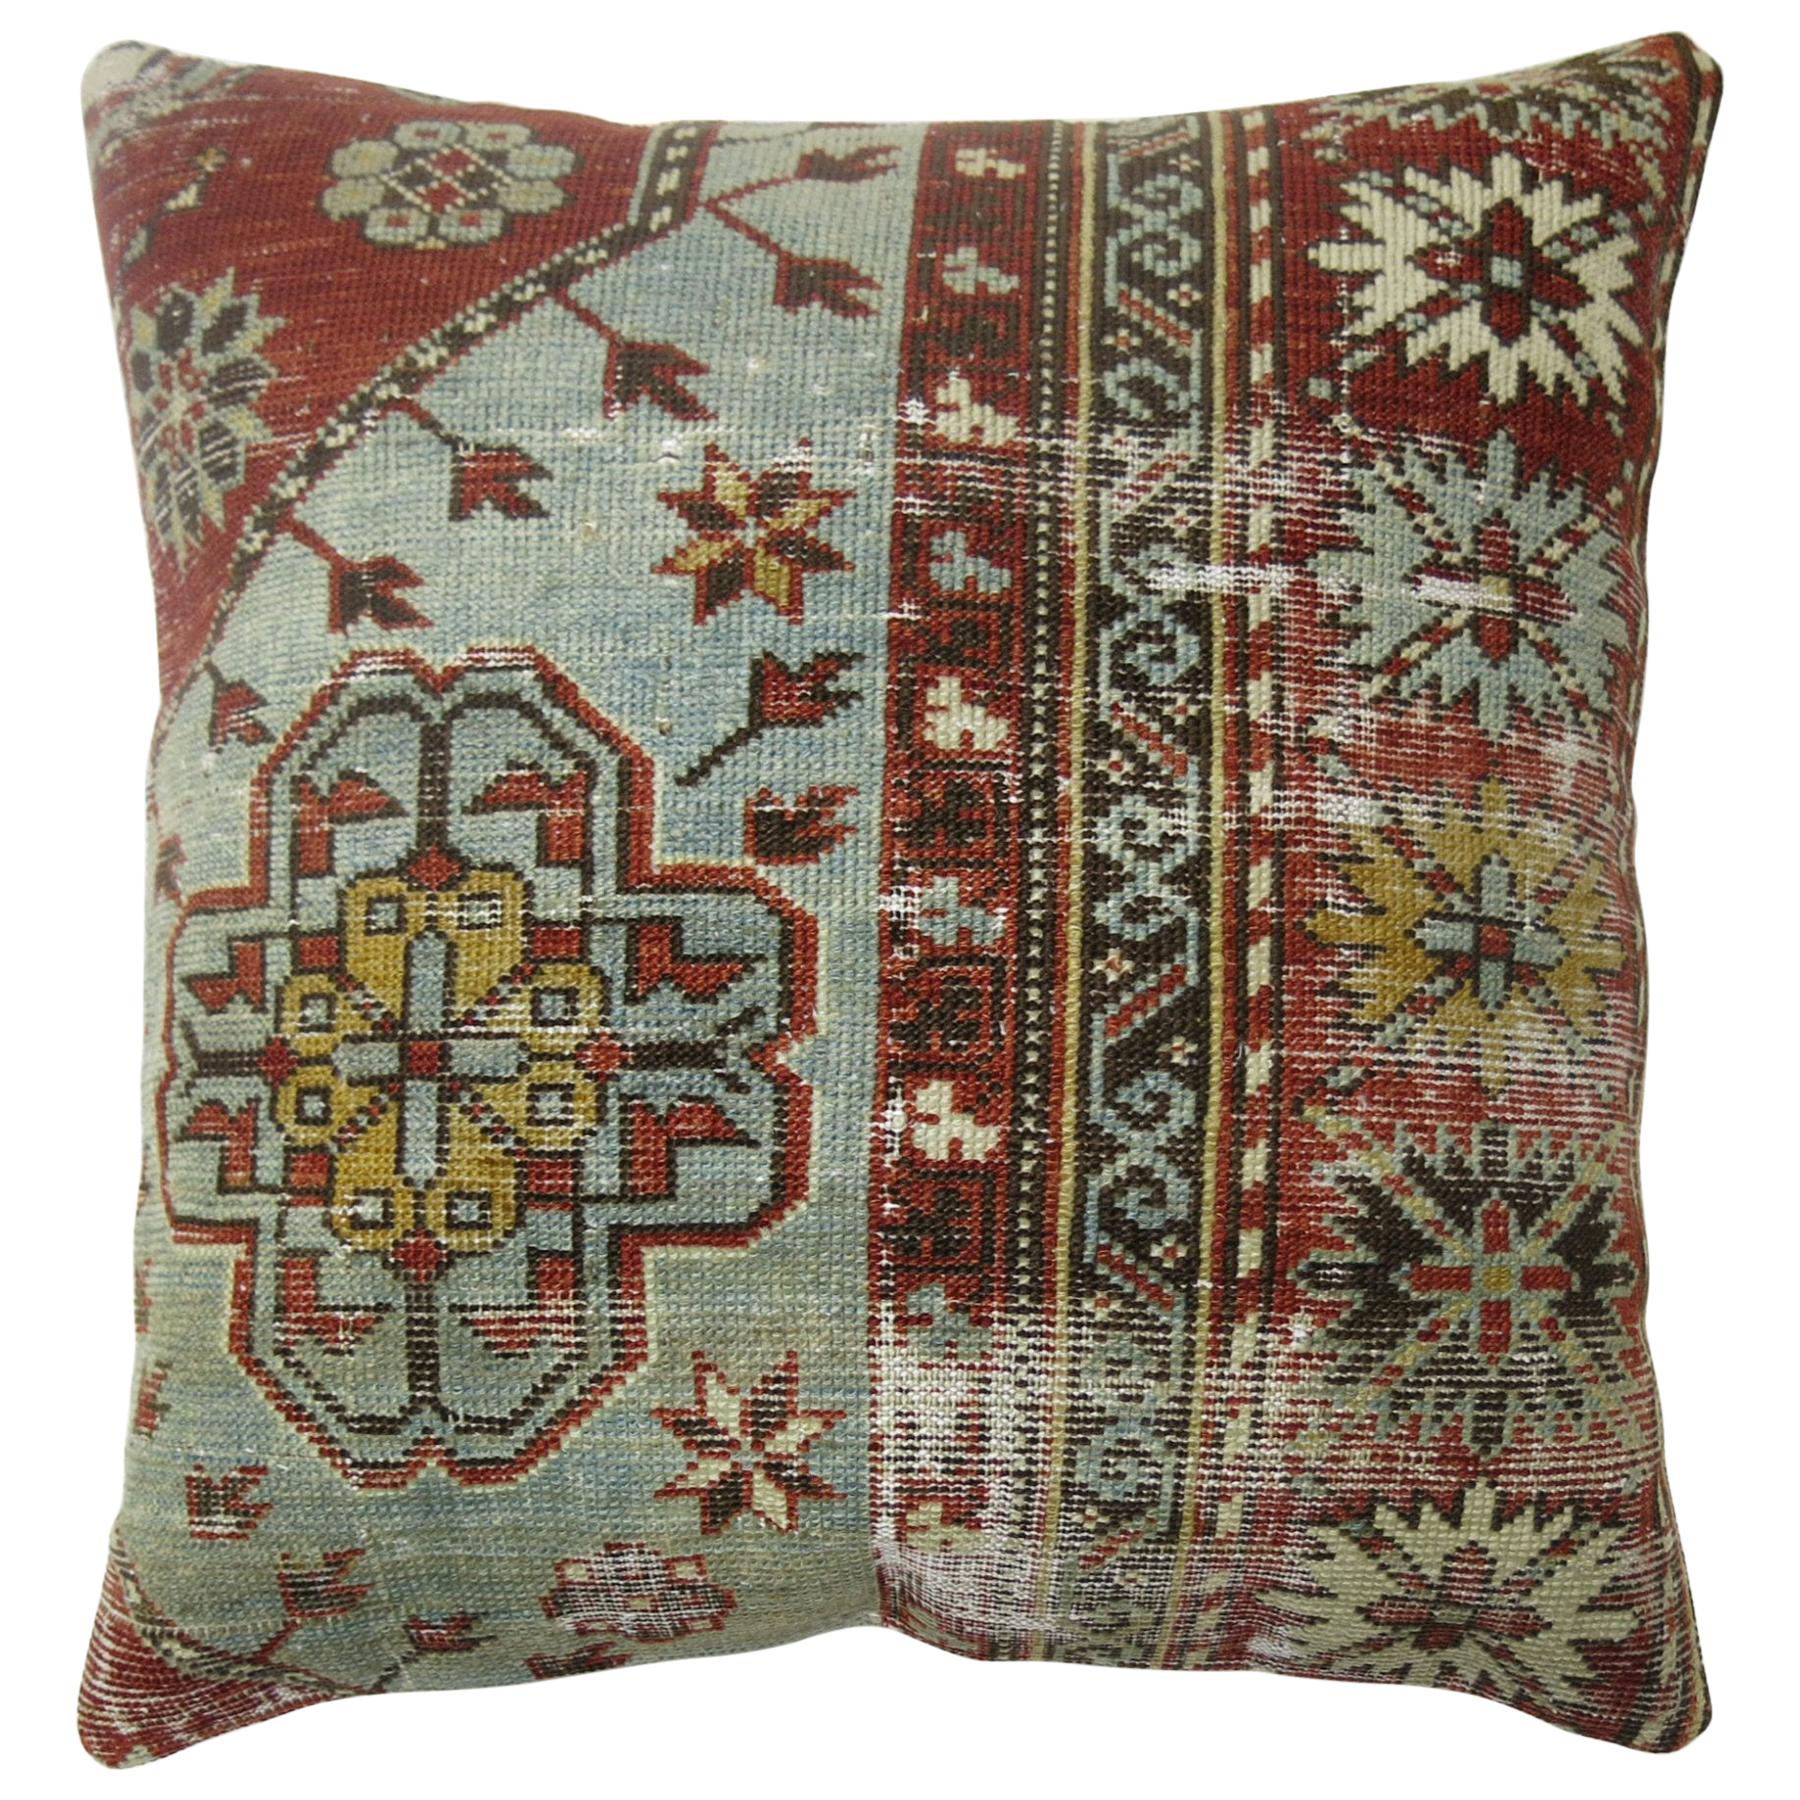 Zabihi Collection Light Gray Blue Red Worn Caucasian Rug Square Rug Pillow